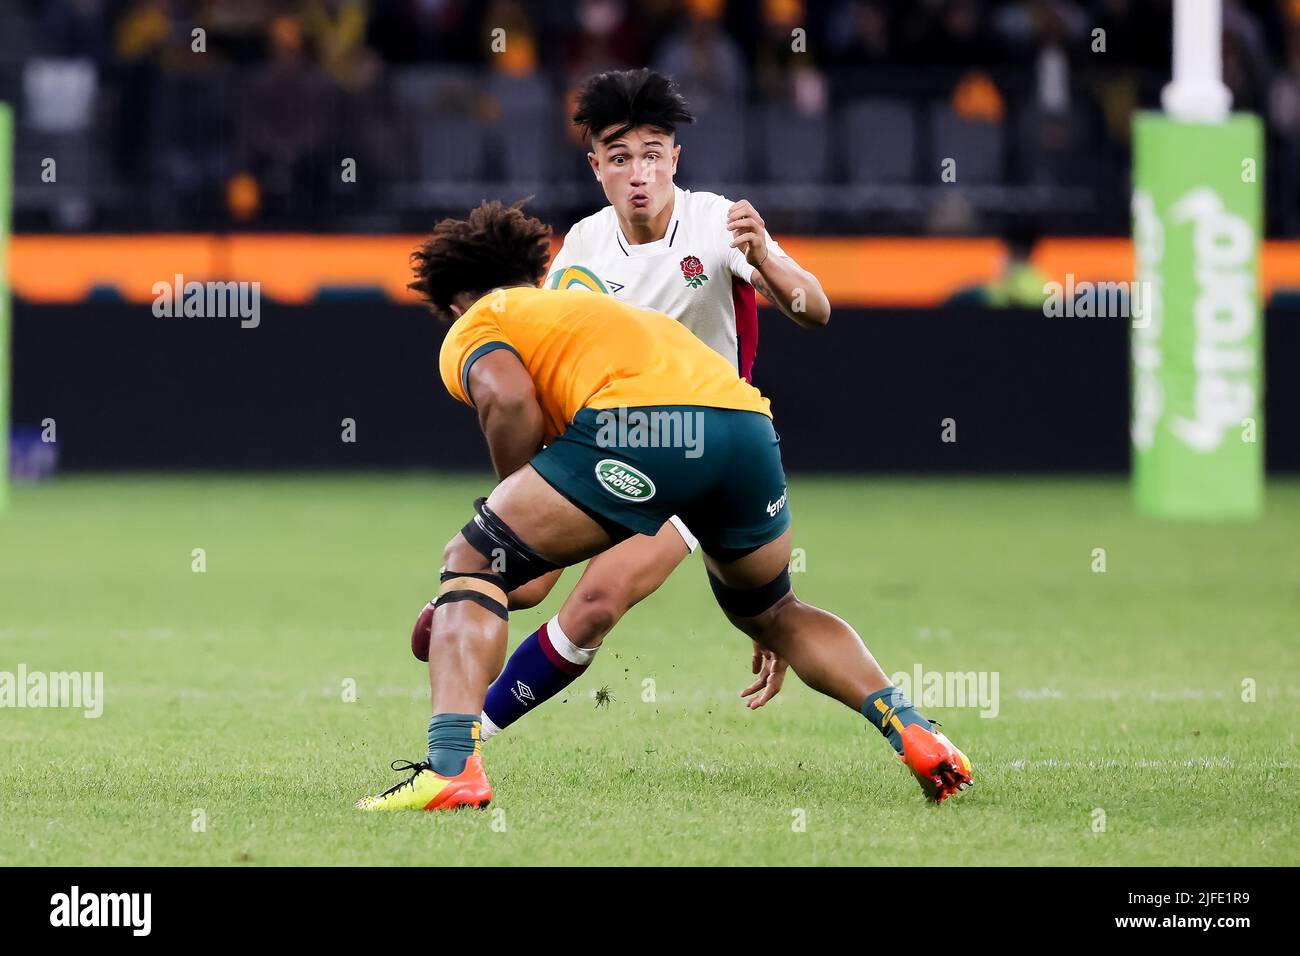 Perth, Australia, 2 July, 2022. Marcus Smith of England runs with the ball during the rugby international test match between the Australia Wallabies and England at Optus Stadium on July 02, 2022 in Perth, Australia. Credit: Graham Conaty/Speed Media/Alamy Live News Stock Photo